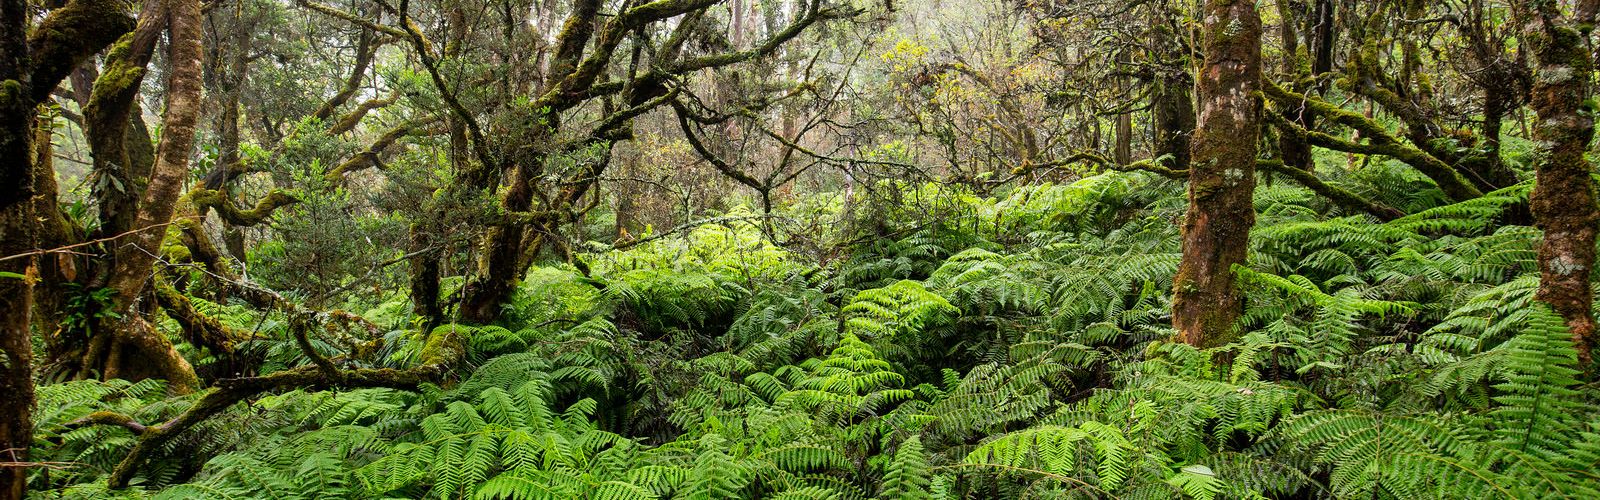 A lush, green forest is filled with ferns and gnarled trees.